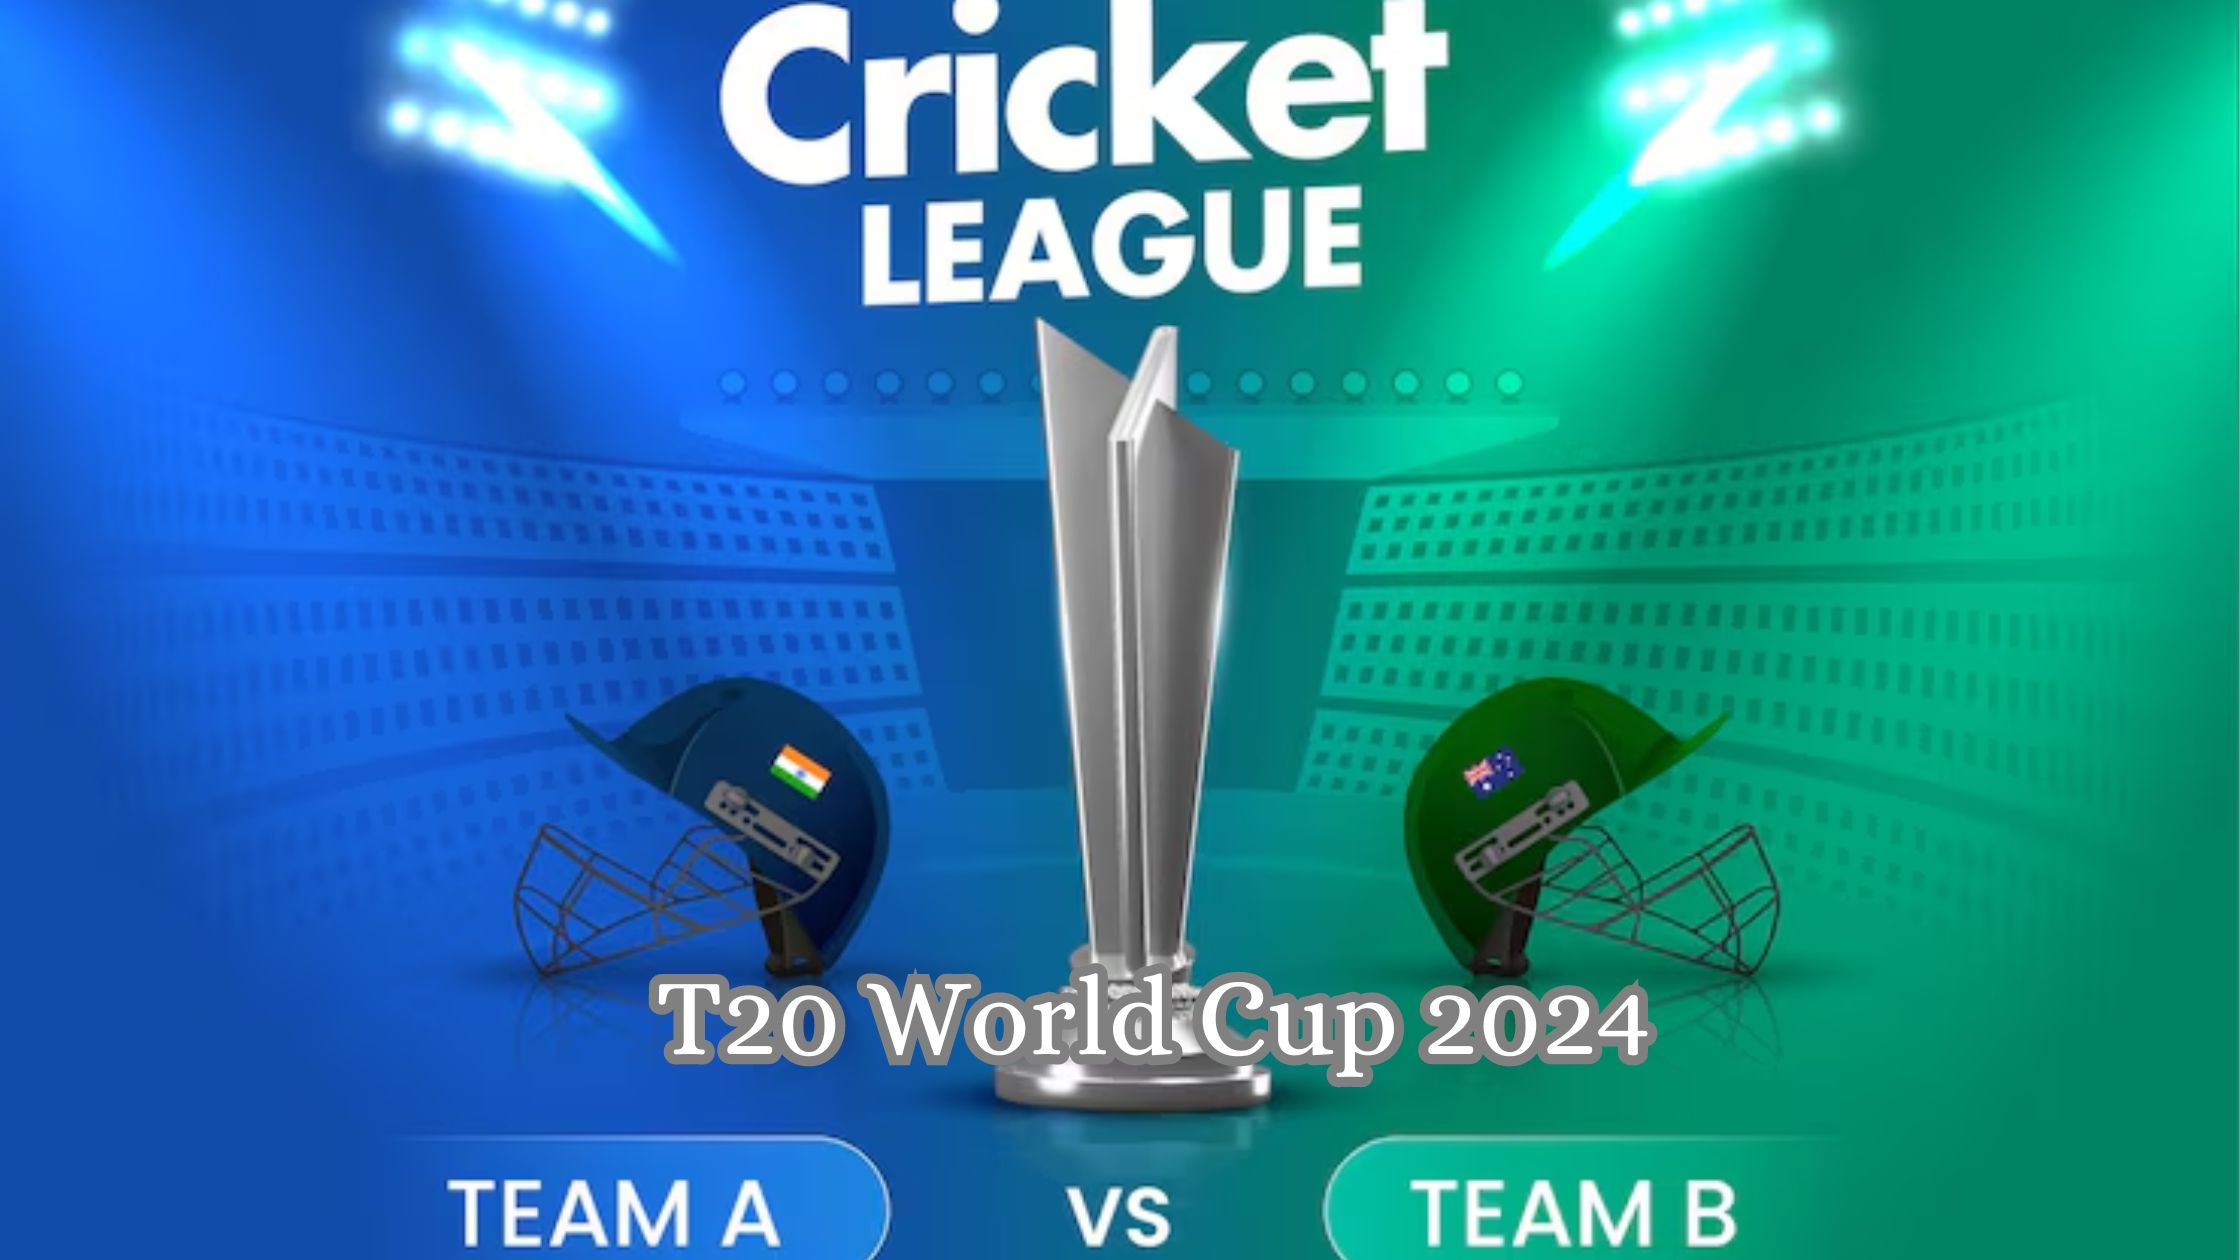 How Many Matches Will India Play in the T20 World Cup 2024?